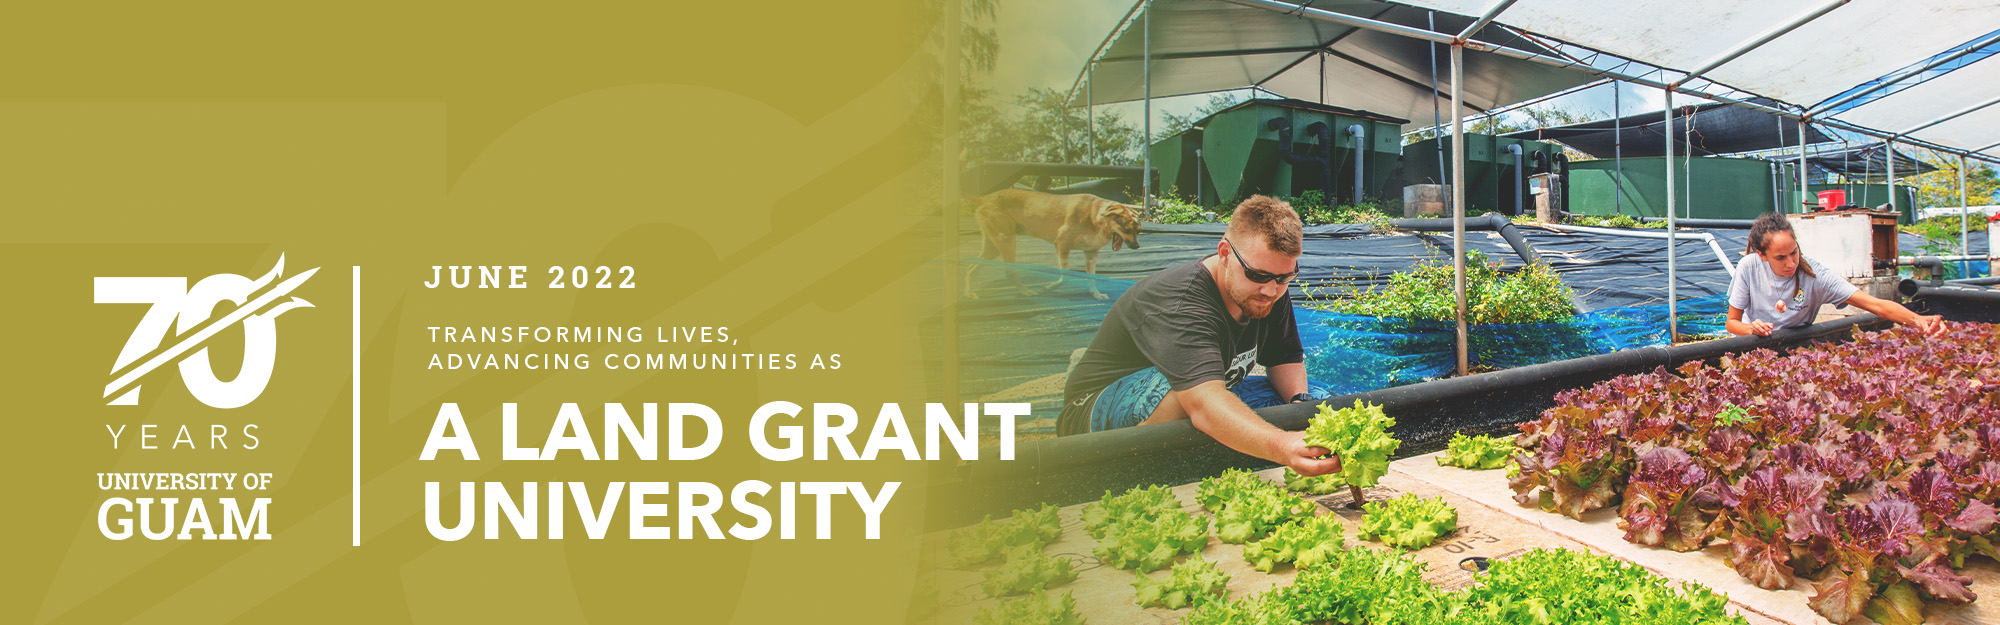 70 Years of UOG, June 2022: Transforming Lives, Advancing Communities as a Land Grant University